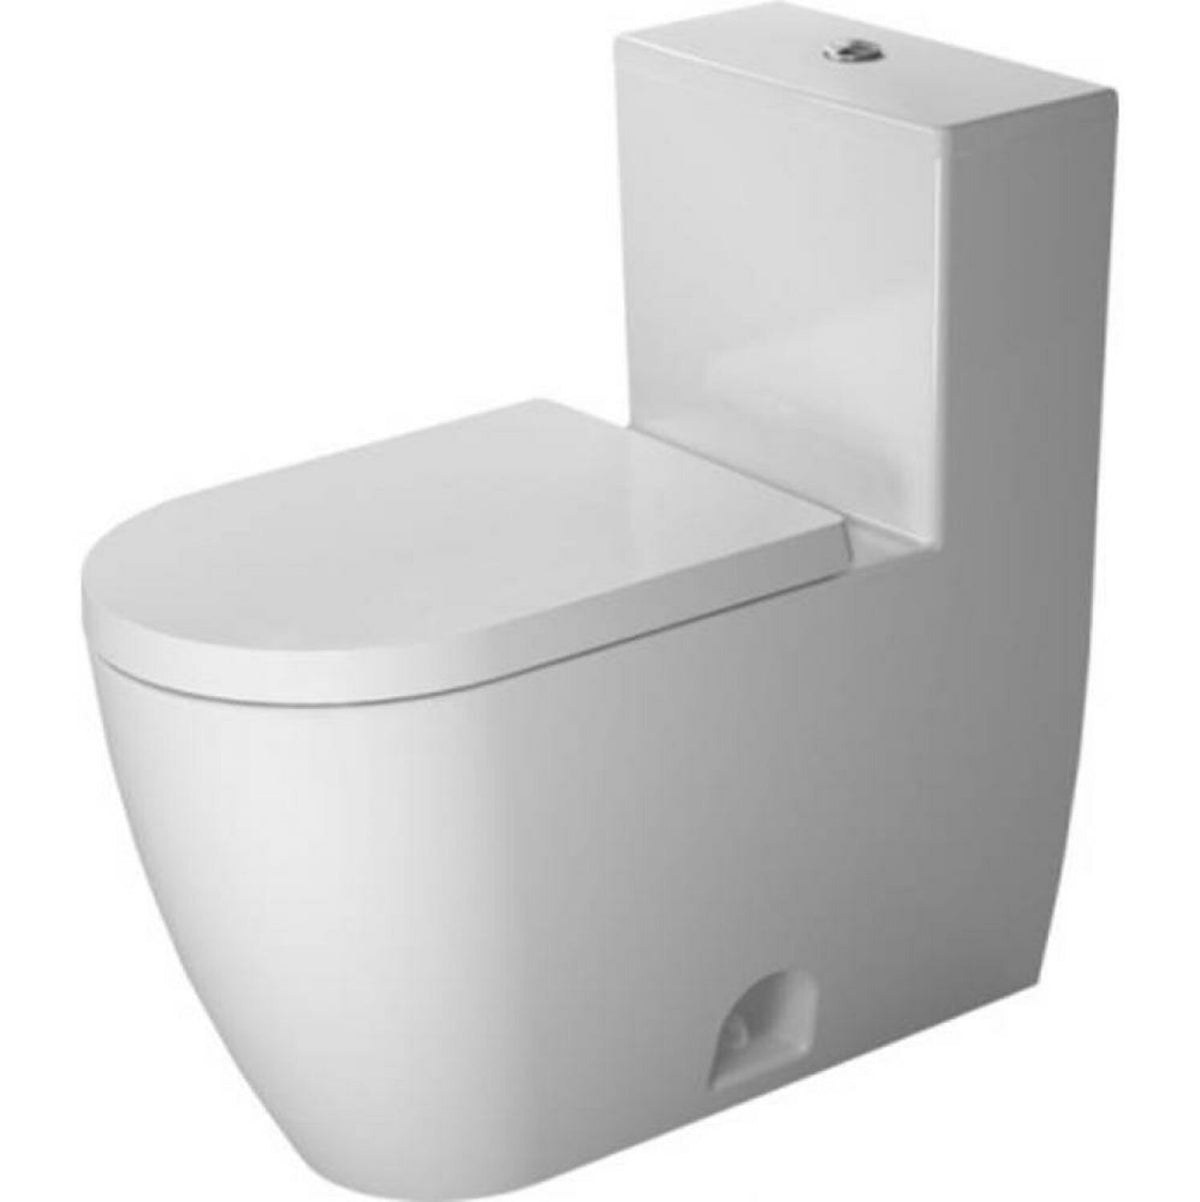 ME BY STARCK ONE-PIECE TOILET DURAVIT RIMLESS®